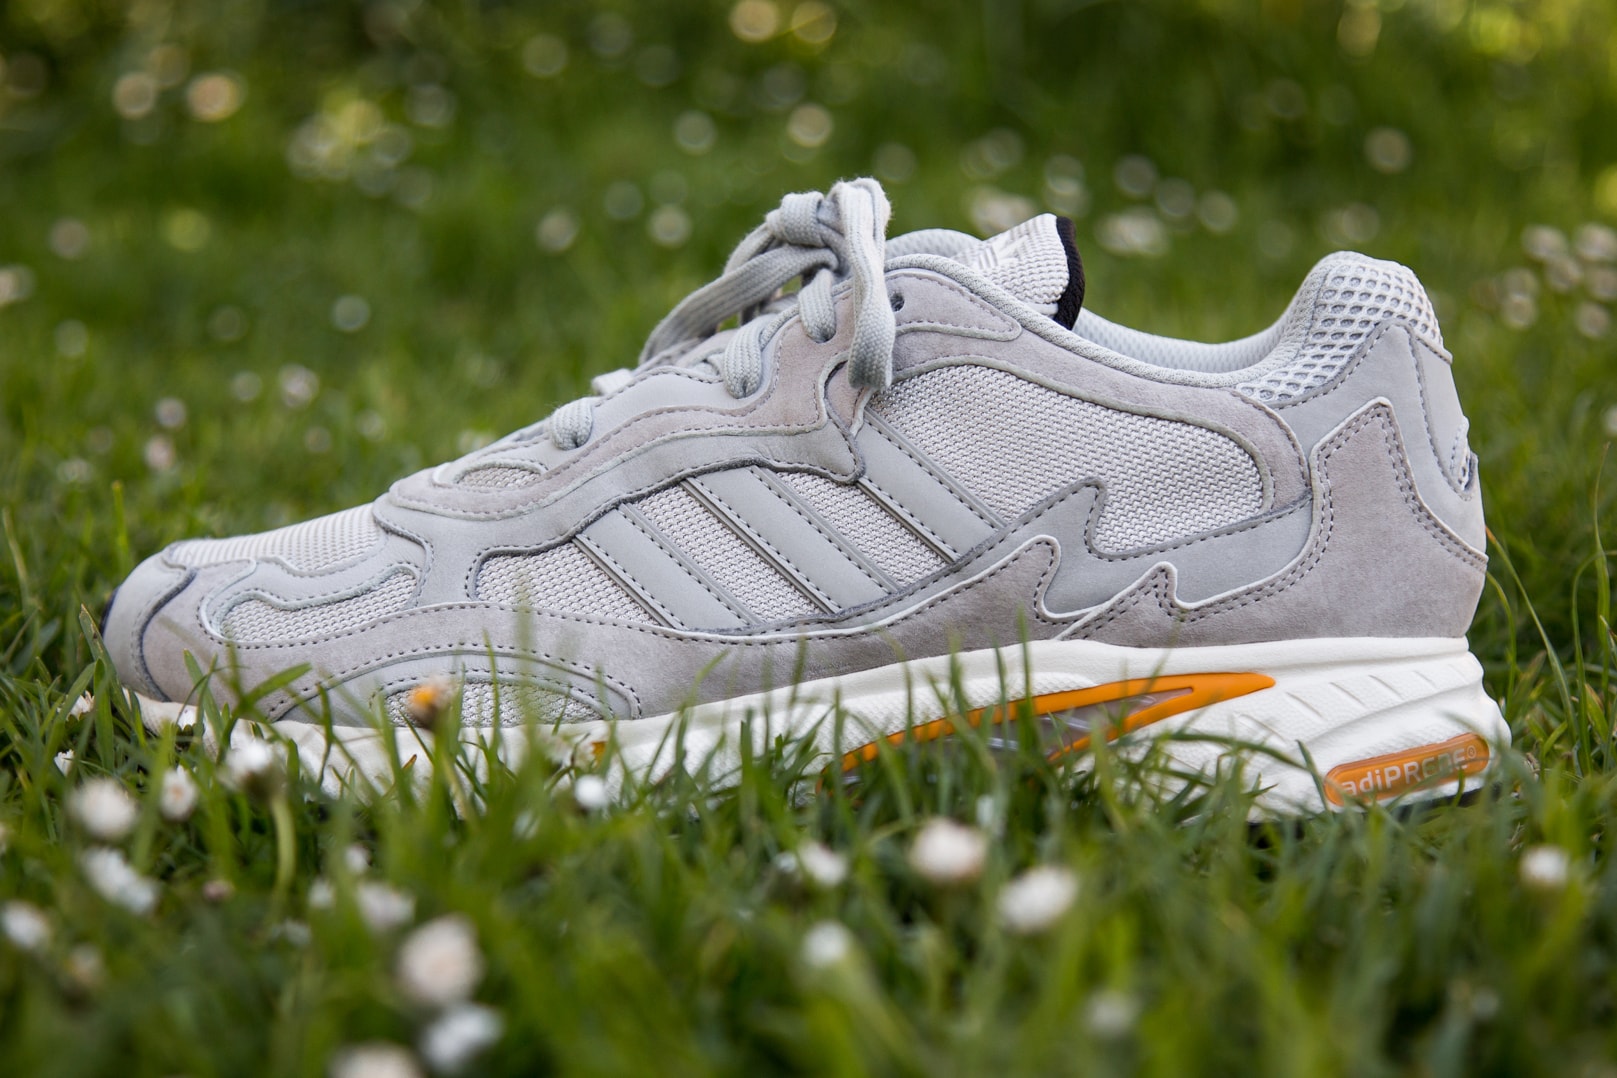 adidas Originals "Temper Run" Stone Grey 2018 Closer Look Kicks Shoes Sneakers Trainers Retail Price £109 GBP $149 USD Saturday May 5 Release Date First Released 2014 Up Close Details Hanbury Street London Exclusive